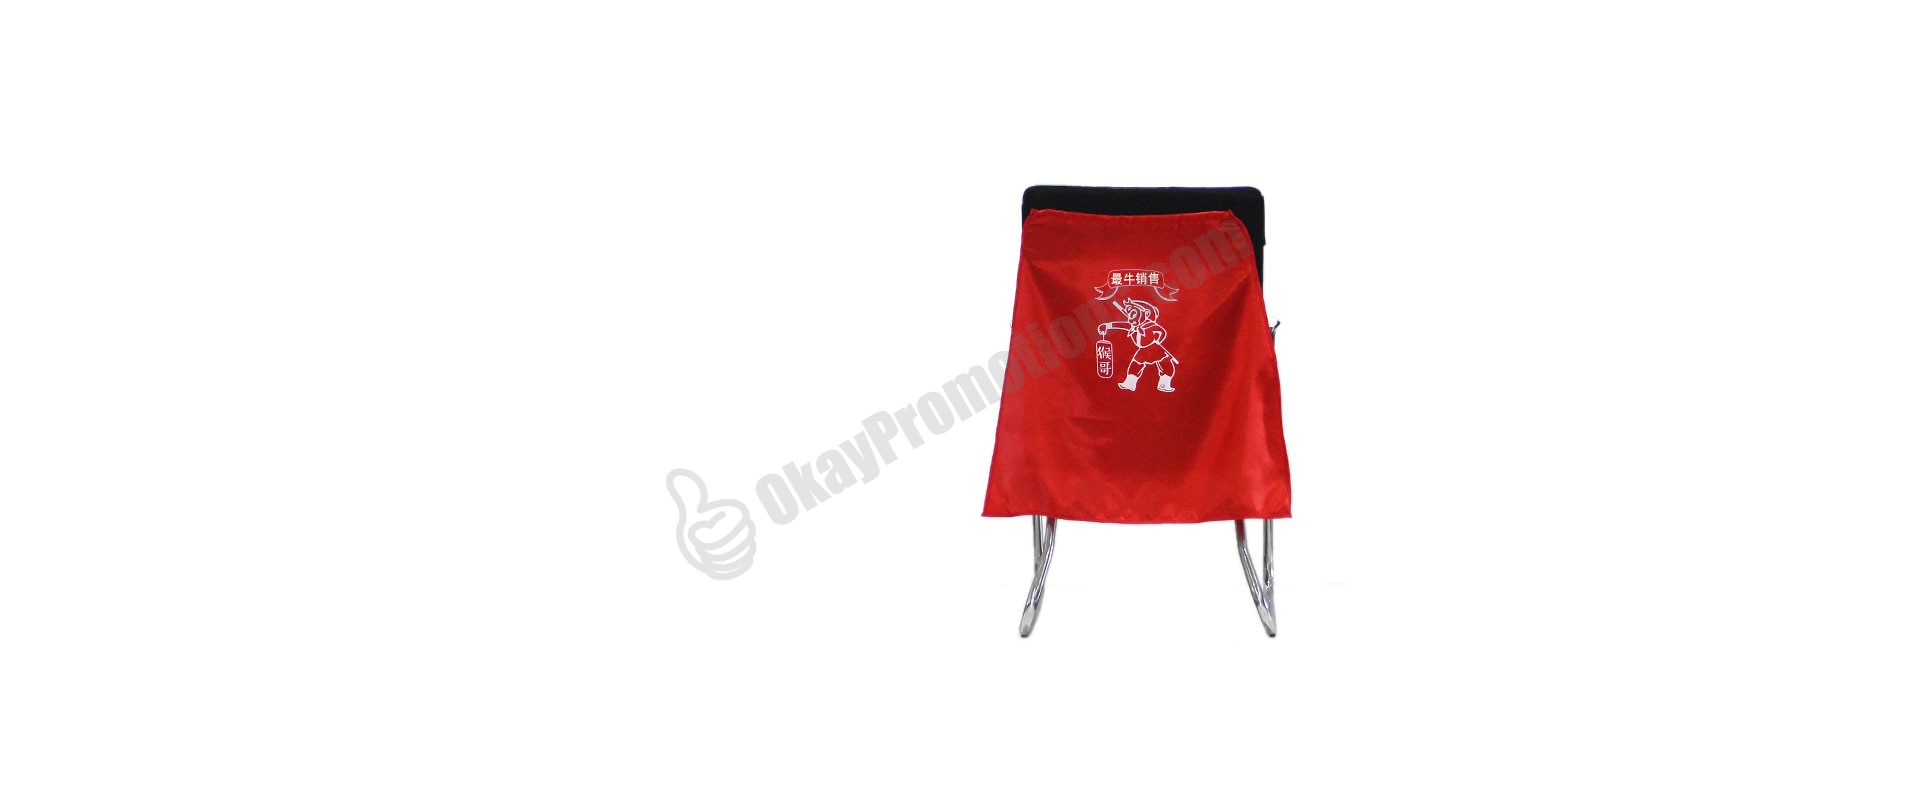 Custom Logo Imprinted Personalized Promotional Chair Capes Trade Show Advertising Corporate Marketing Business Sales Promos